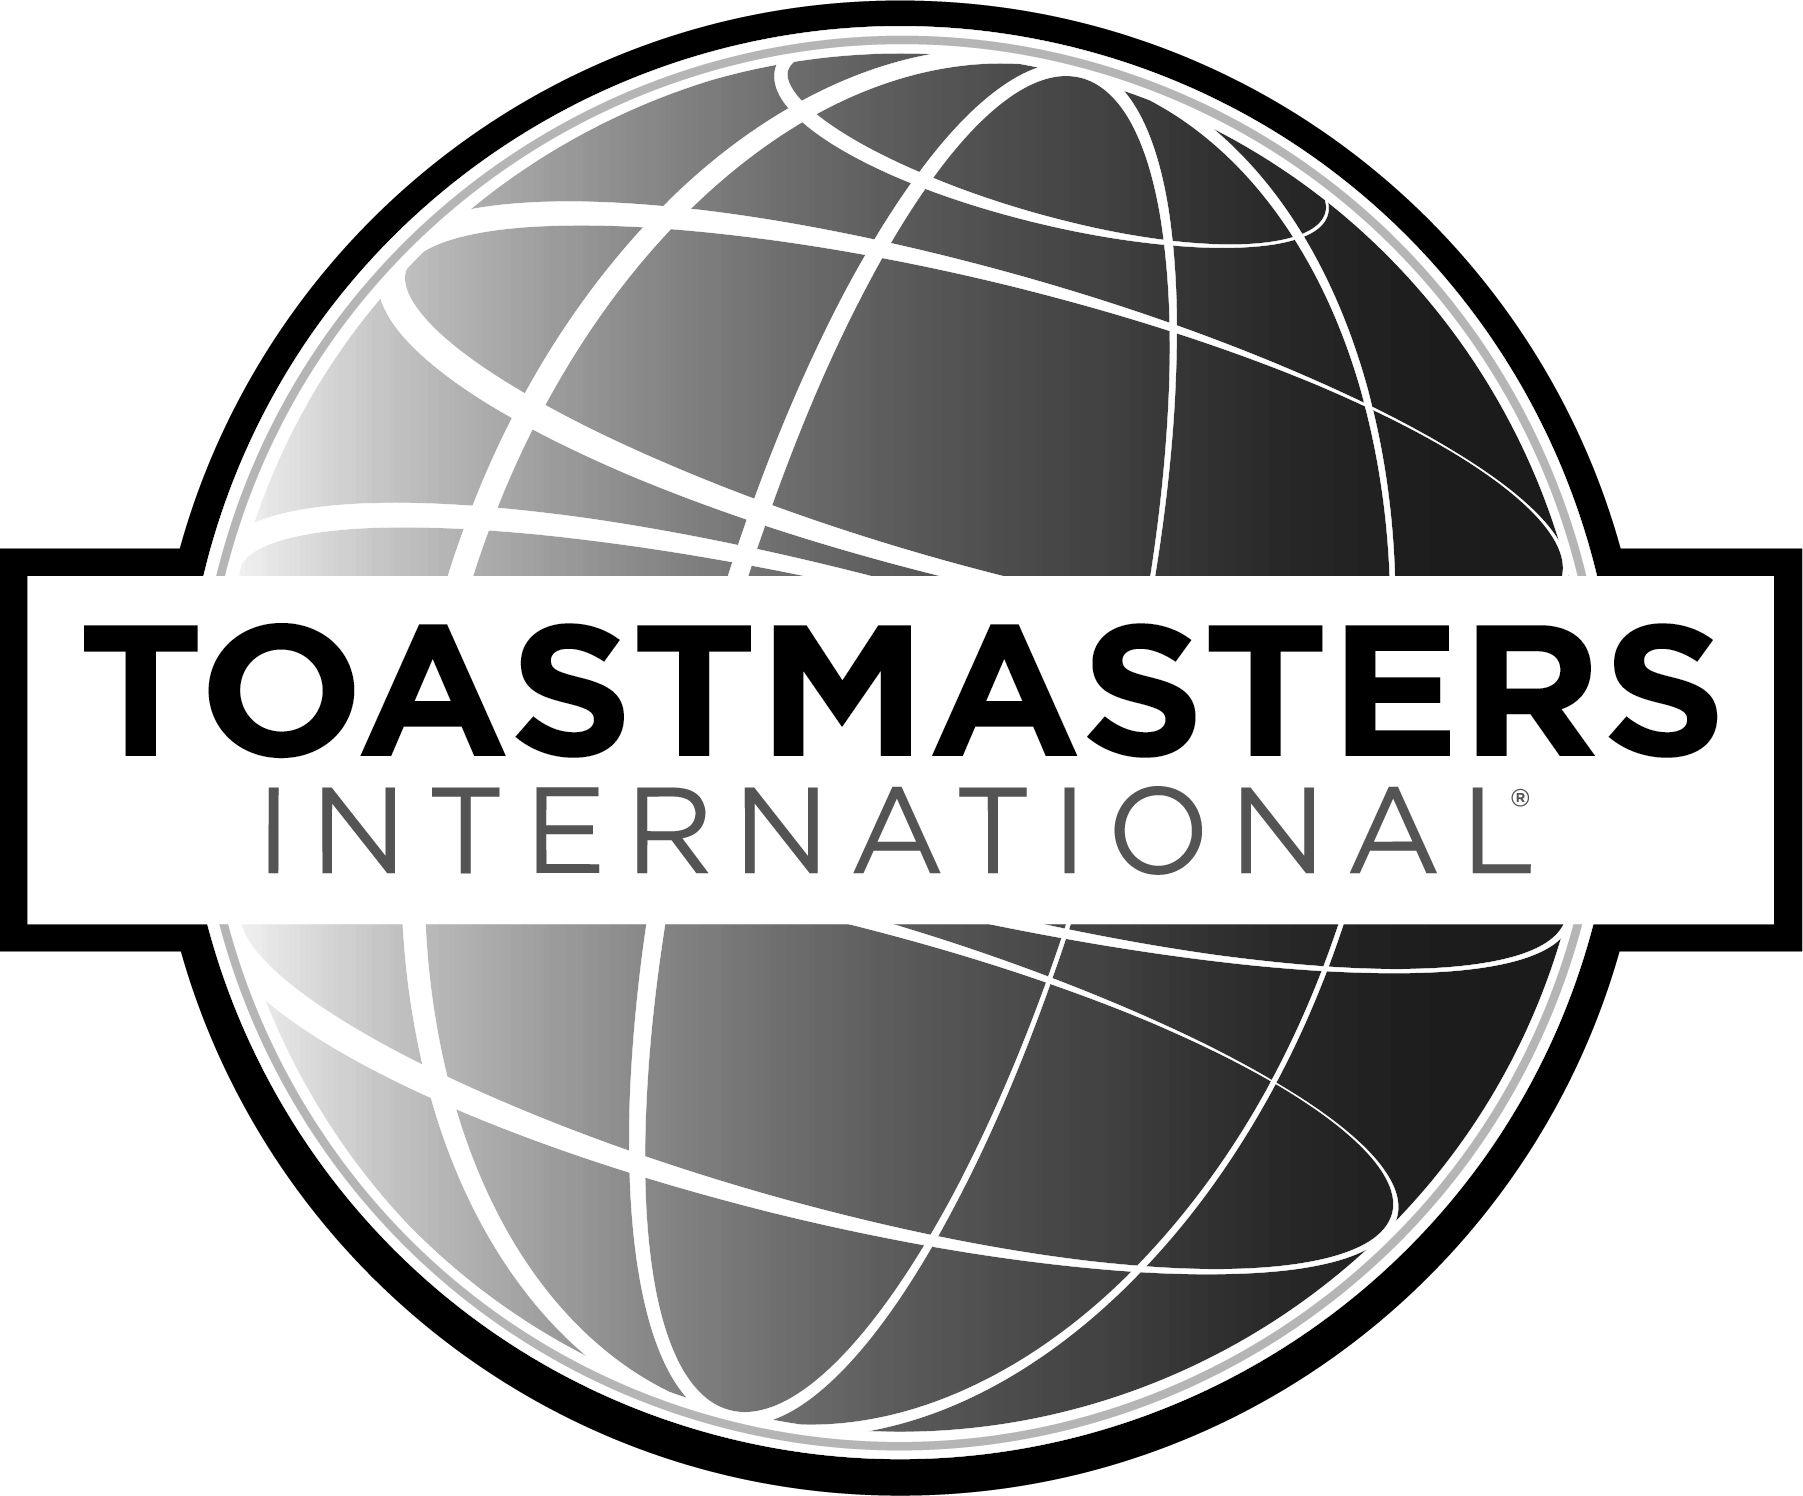 Red and White Lines with a Gavel Logo - Toastmasters International -Logo and Design Elements